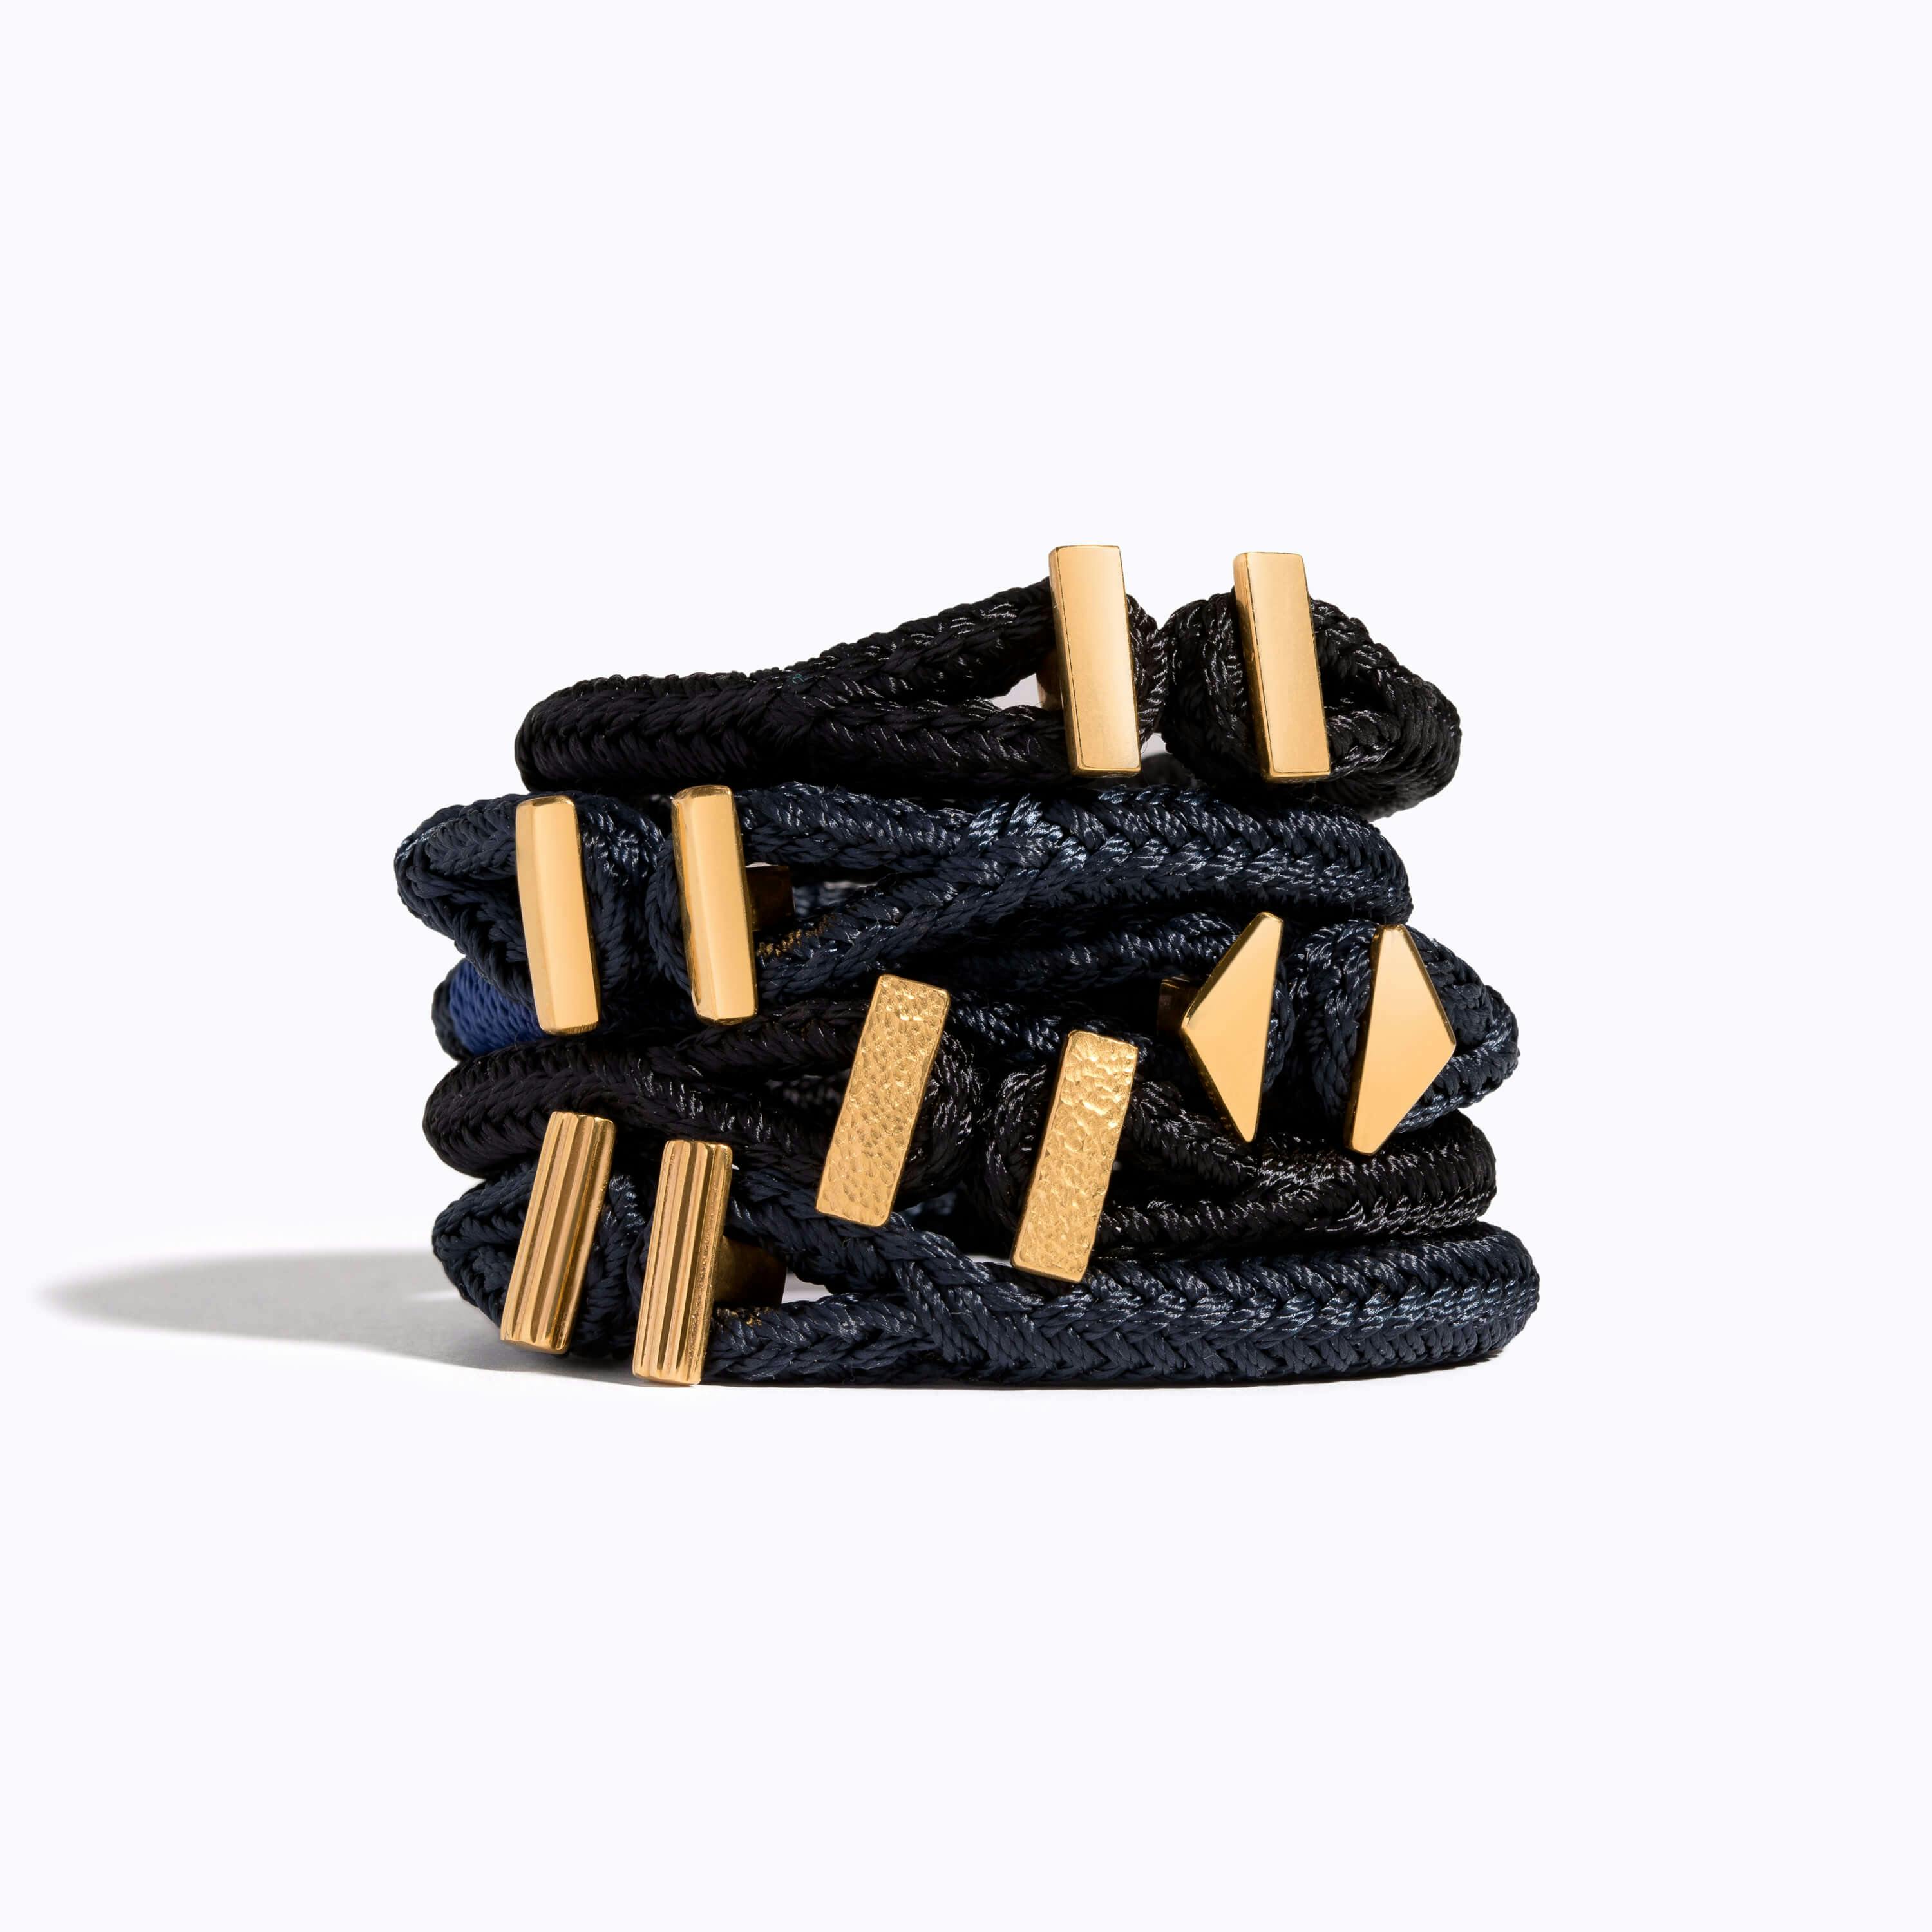 Woven Bracelet Collection on nylon rope